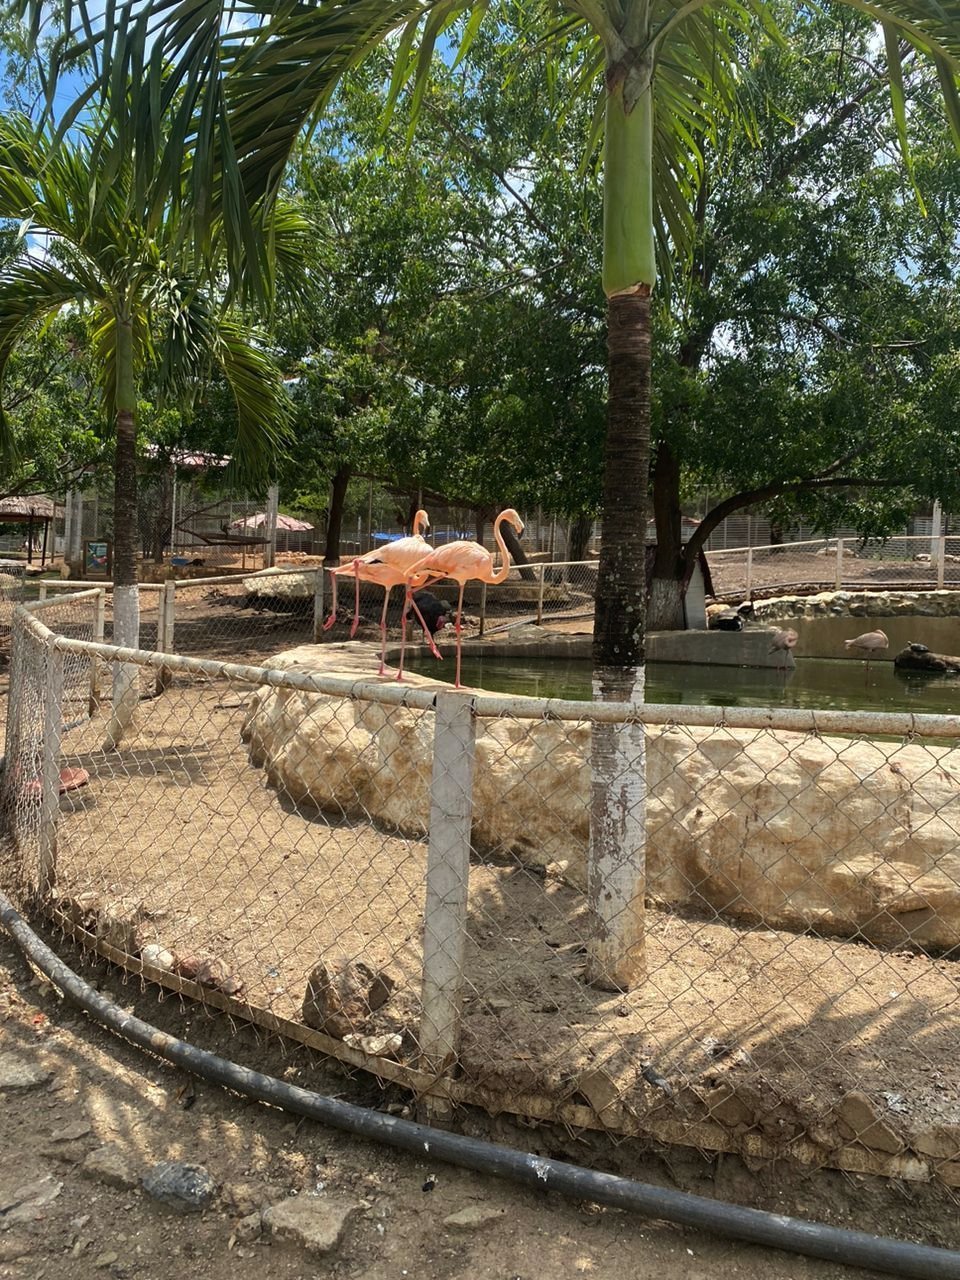 An enclosure for flamingos at the zoo in the prison